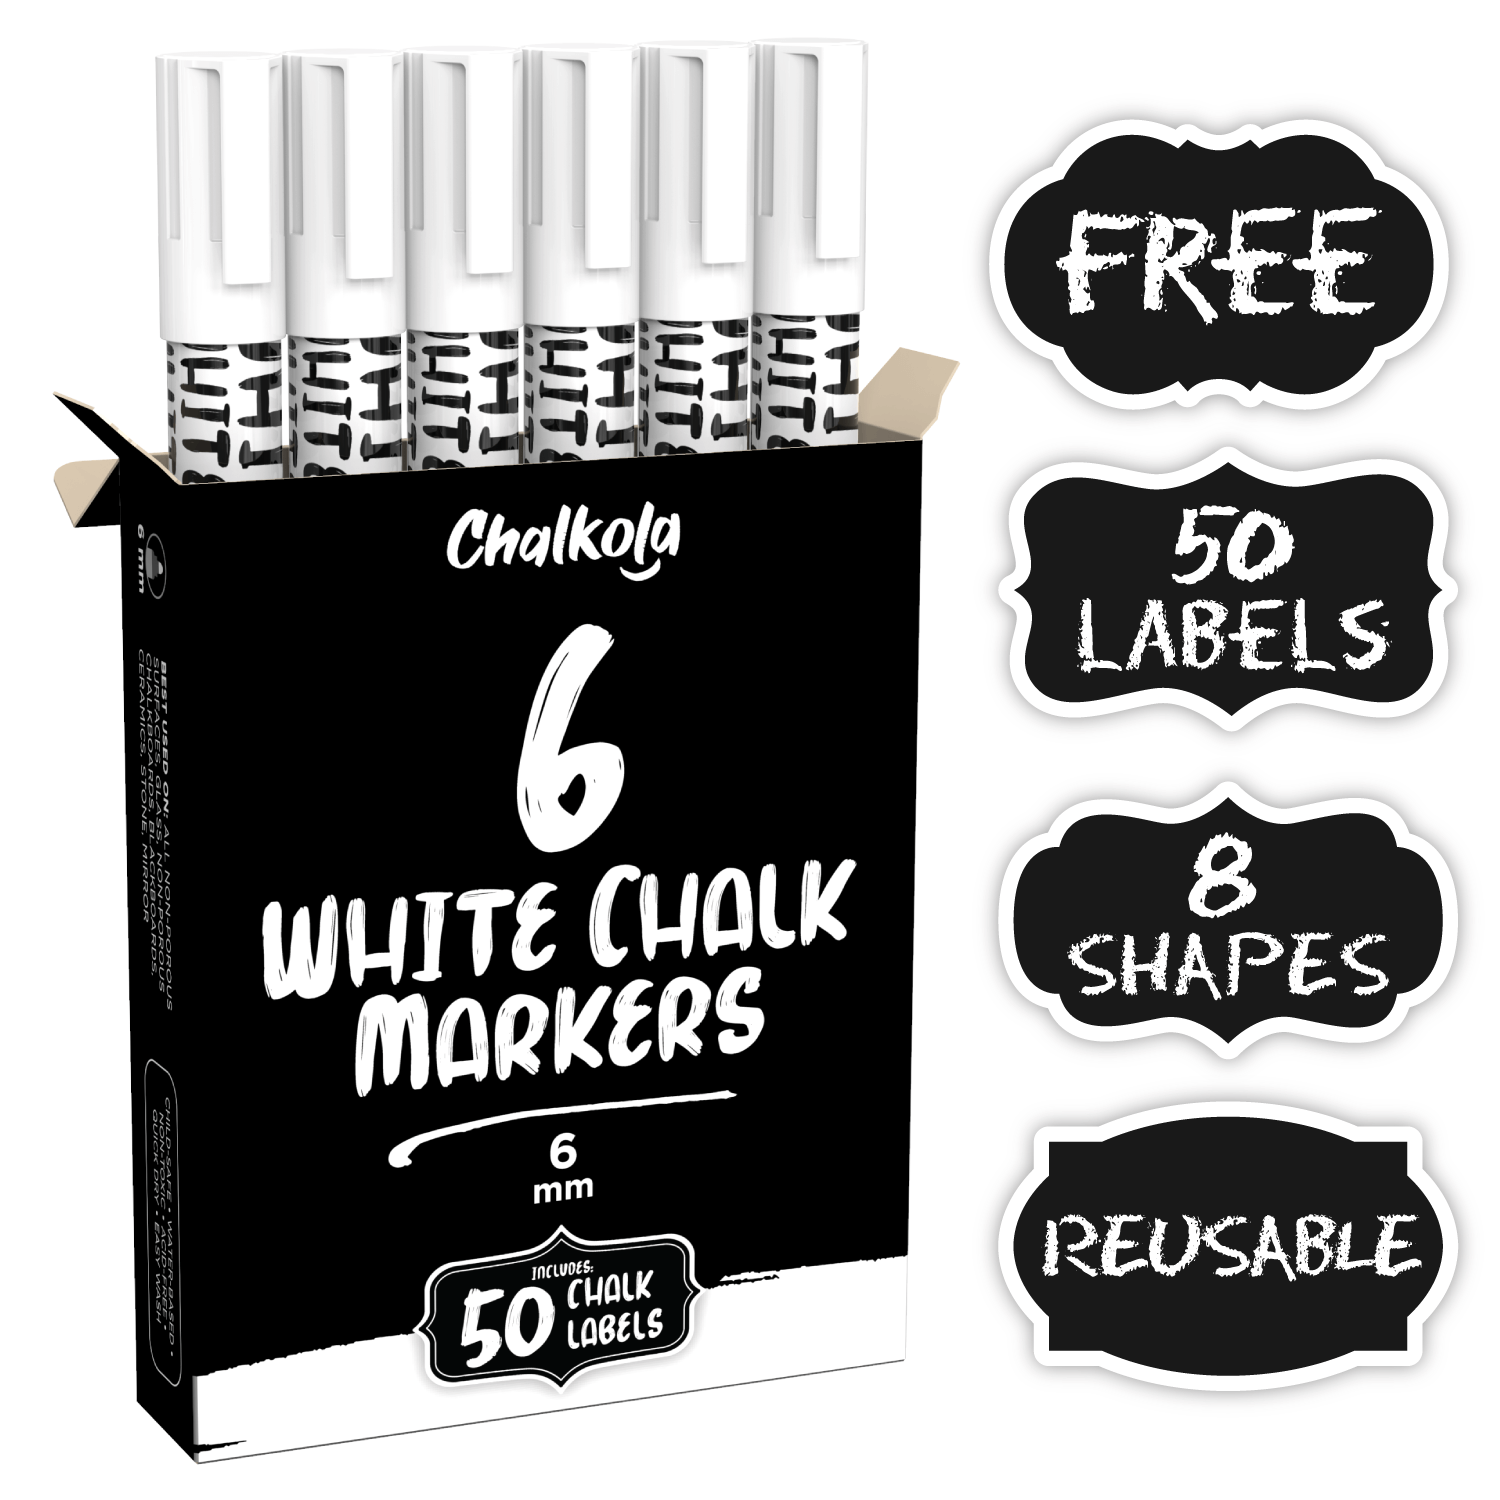 Chalkola Launches New and Upgraded Version of Their Popular Chalk Markers